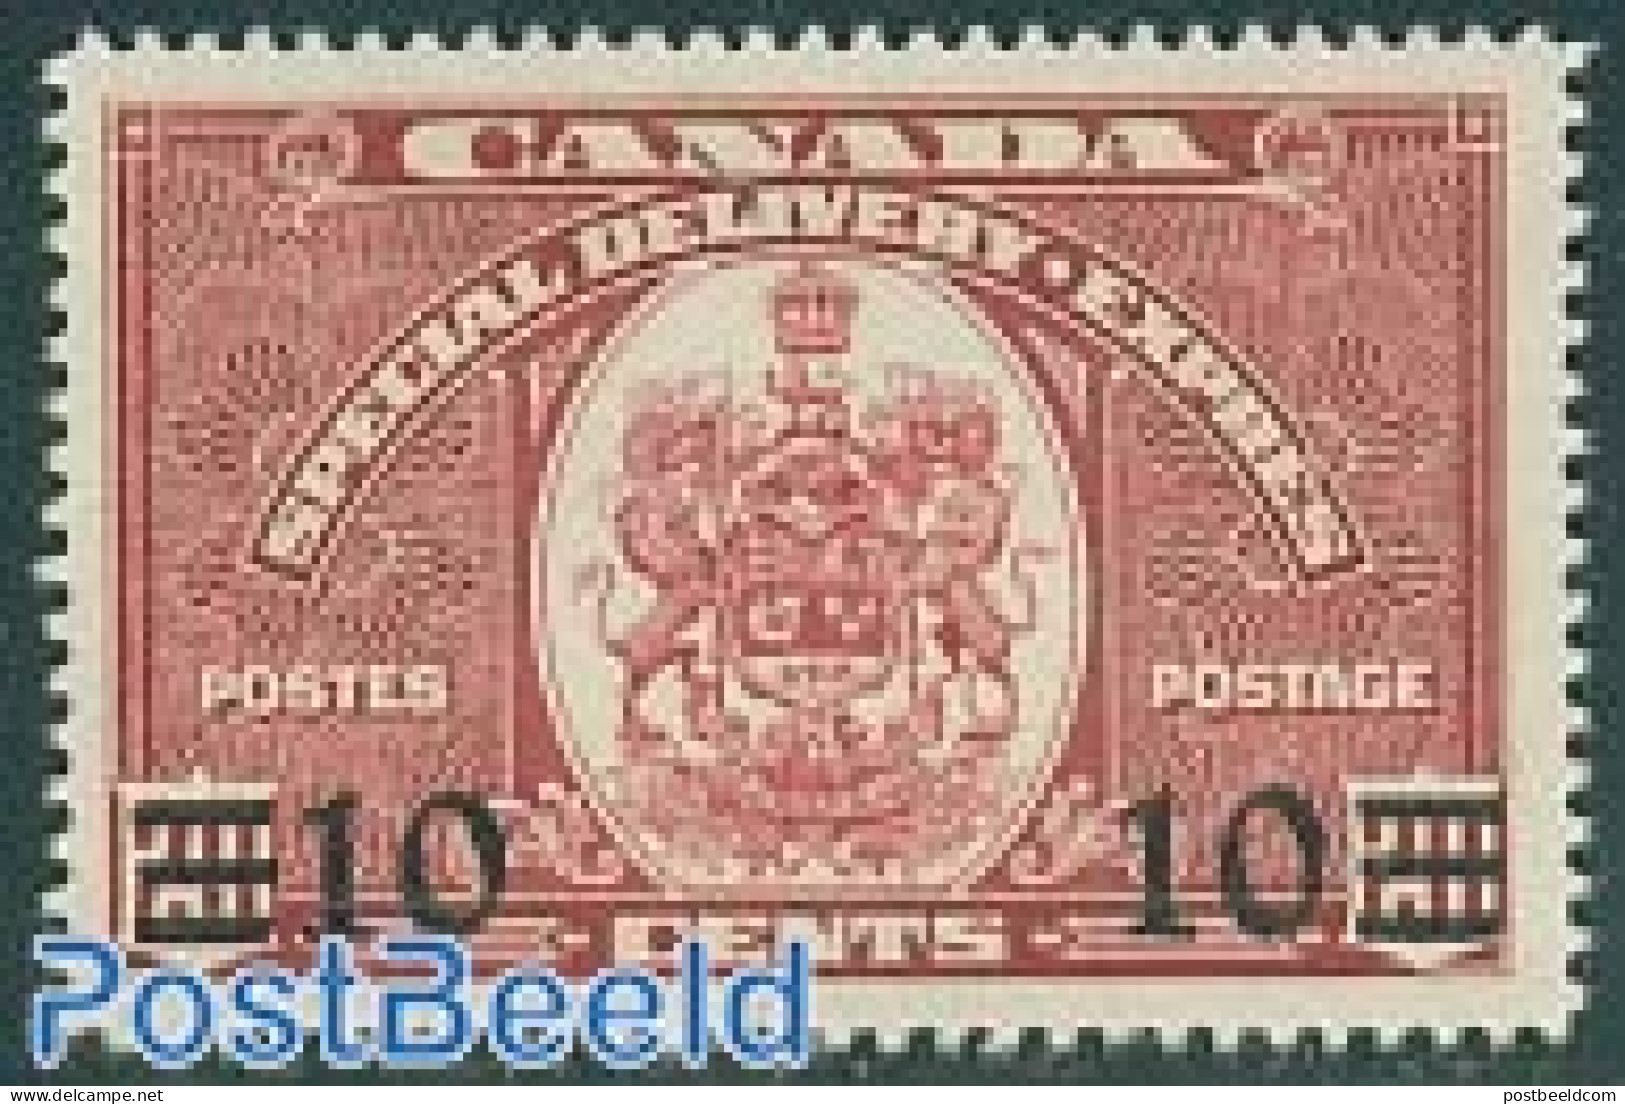 Canada 1939 Express Mail 1v, Unused (hinged), History - Coat Of Arms - Neufs